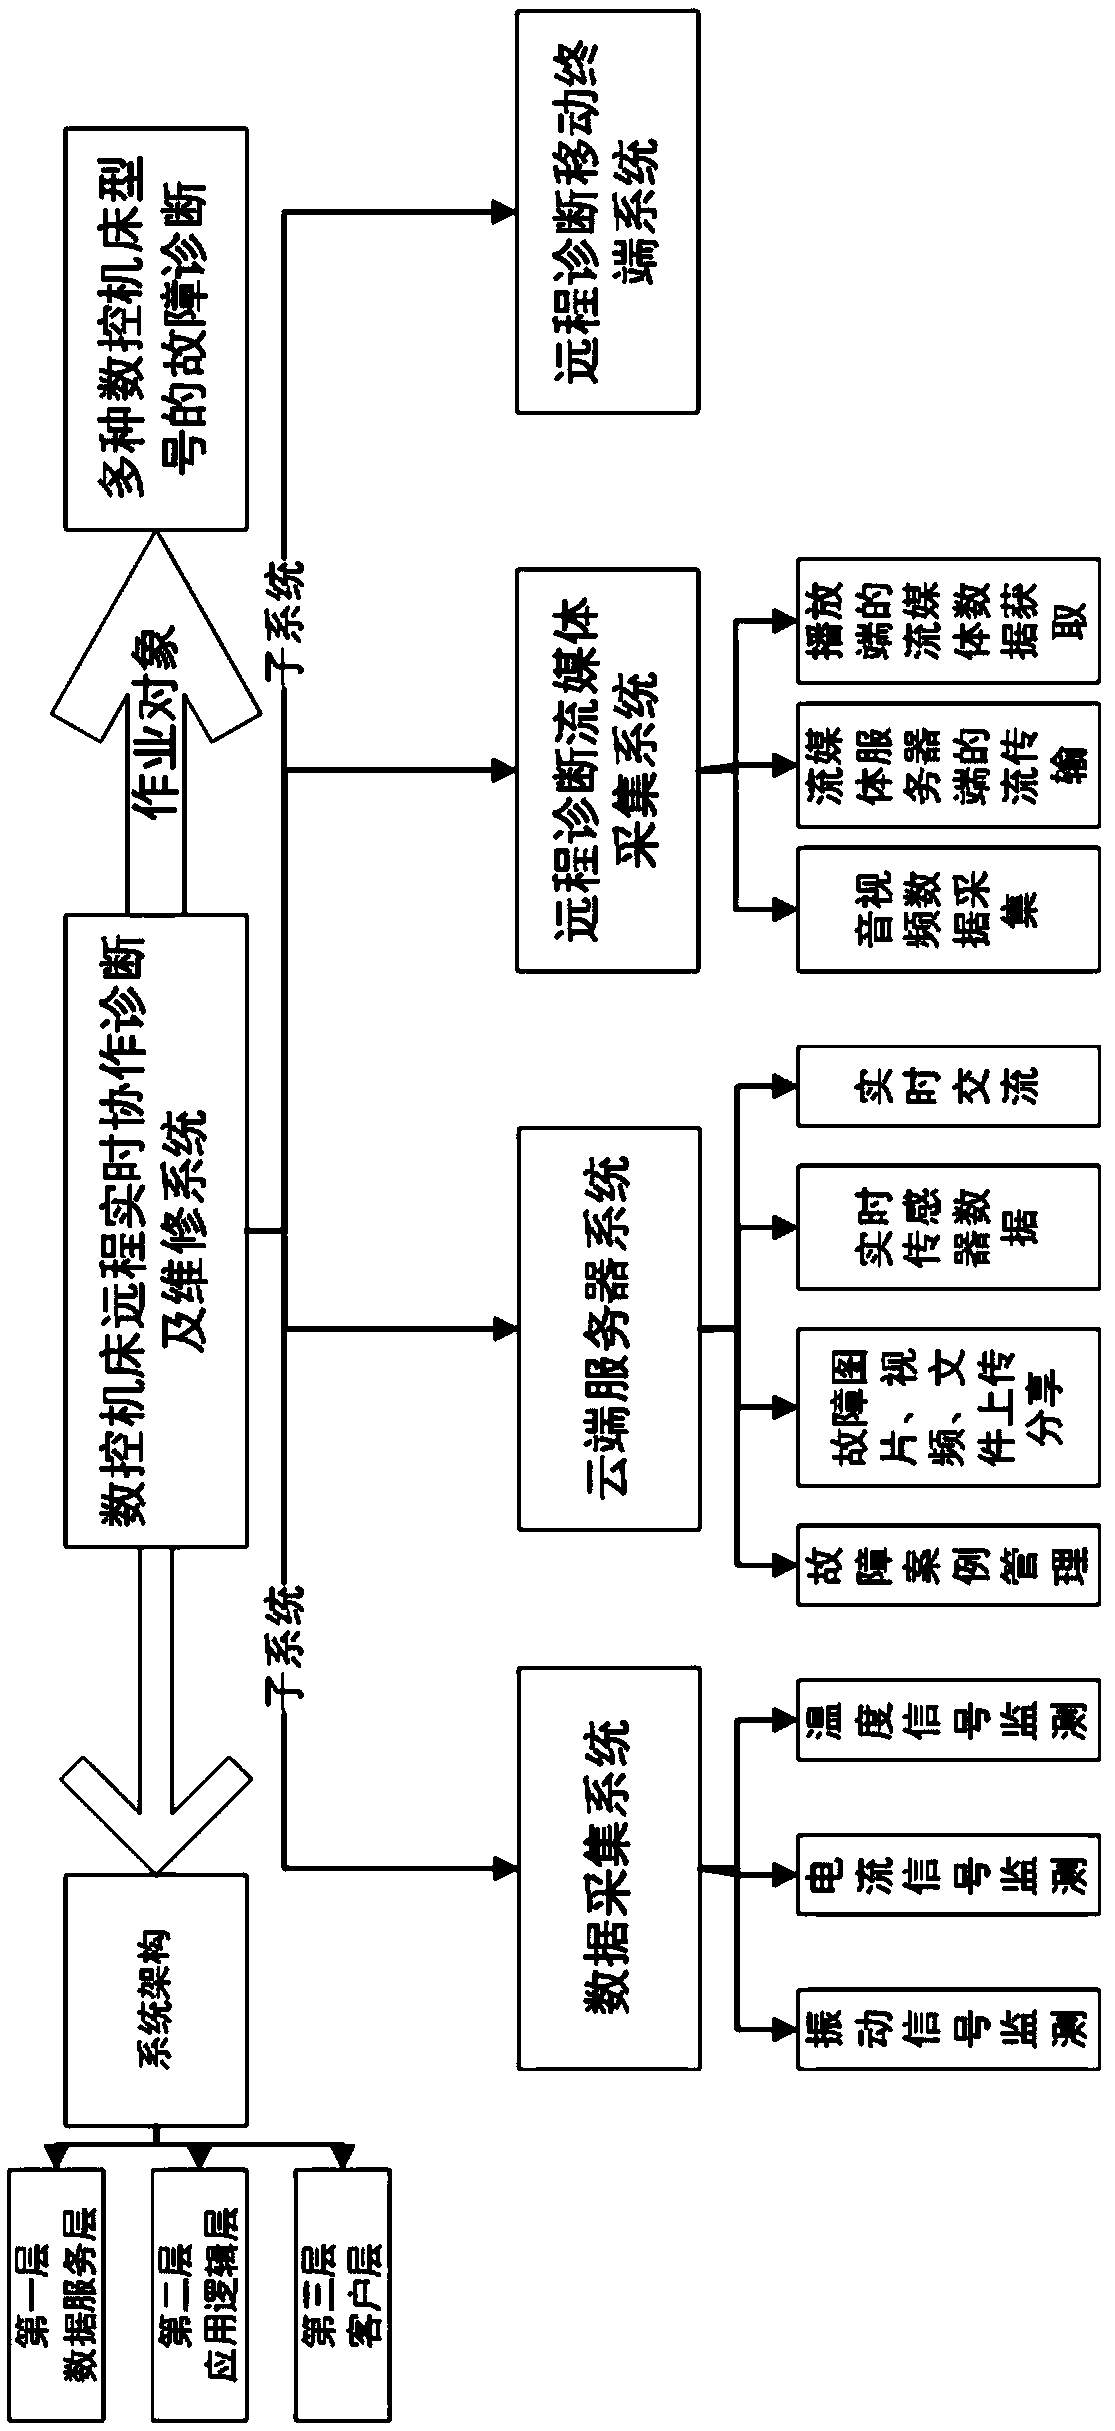 Numerical control machine tool remote real-time cooperation fault diagnosis and maintenance system